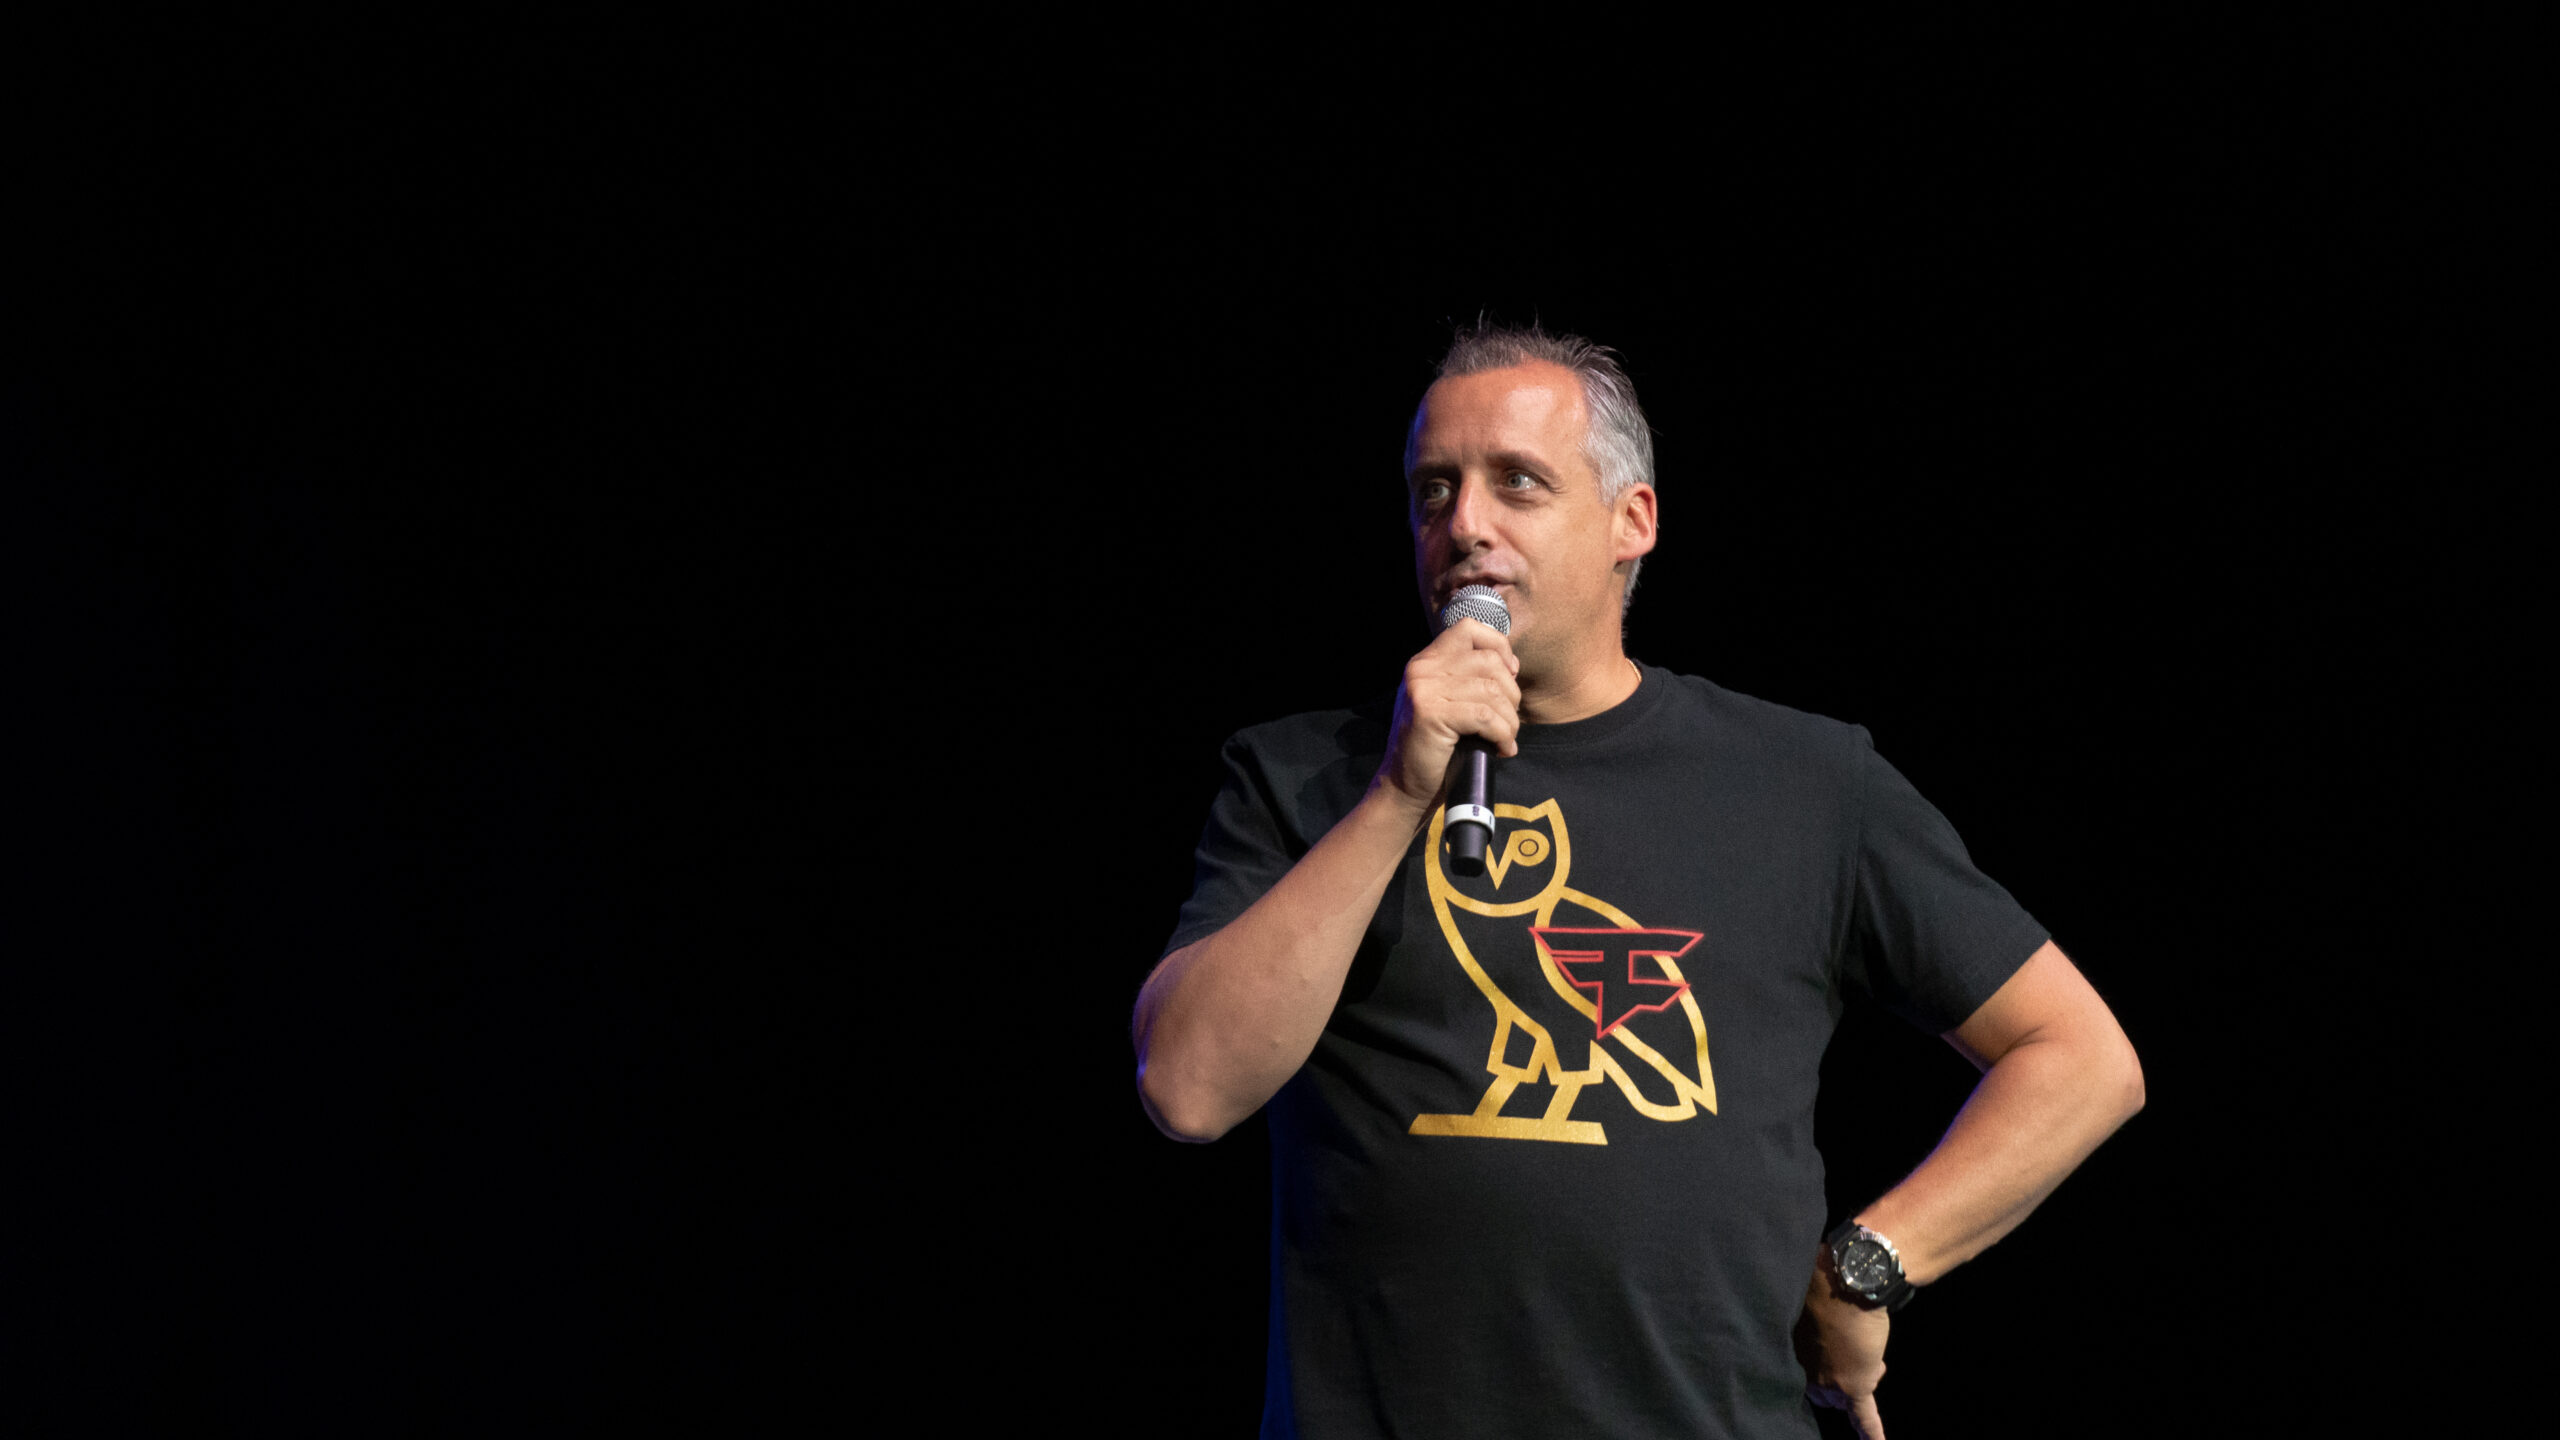 joe gatto from impractical jokers performing at round up comedy show at University of South Florida, Tampa campus. Joe Gatto is speaking into mic